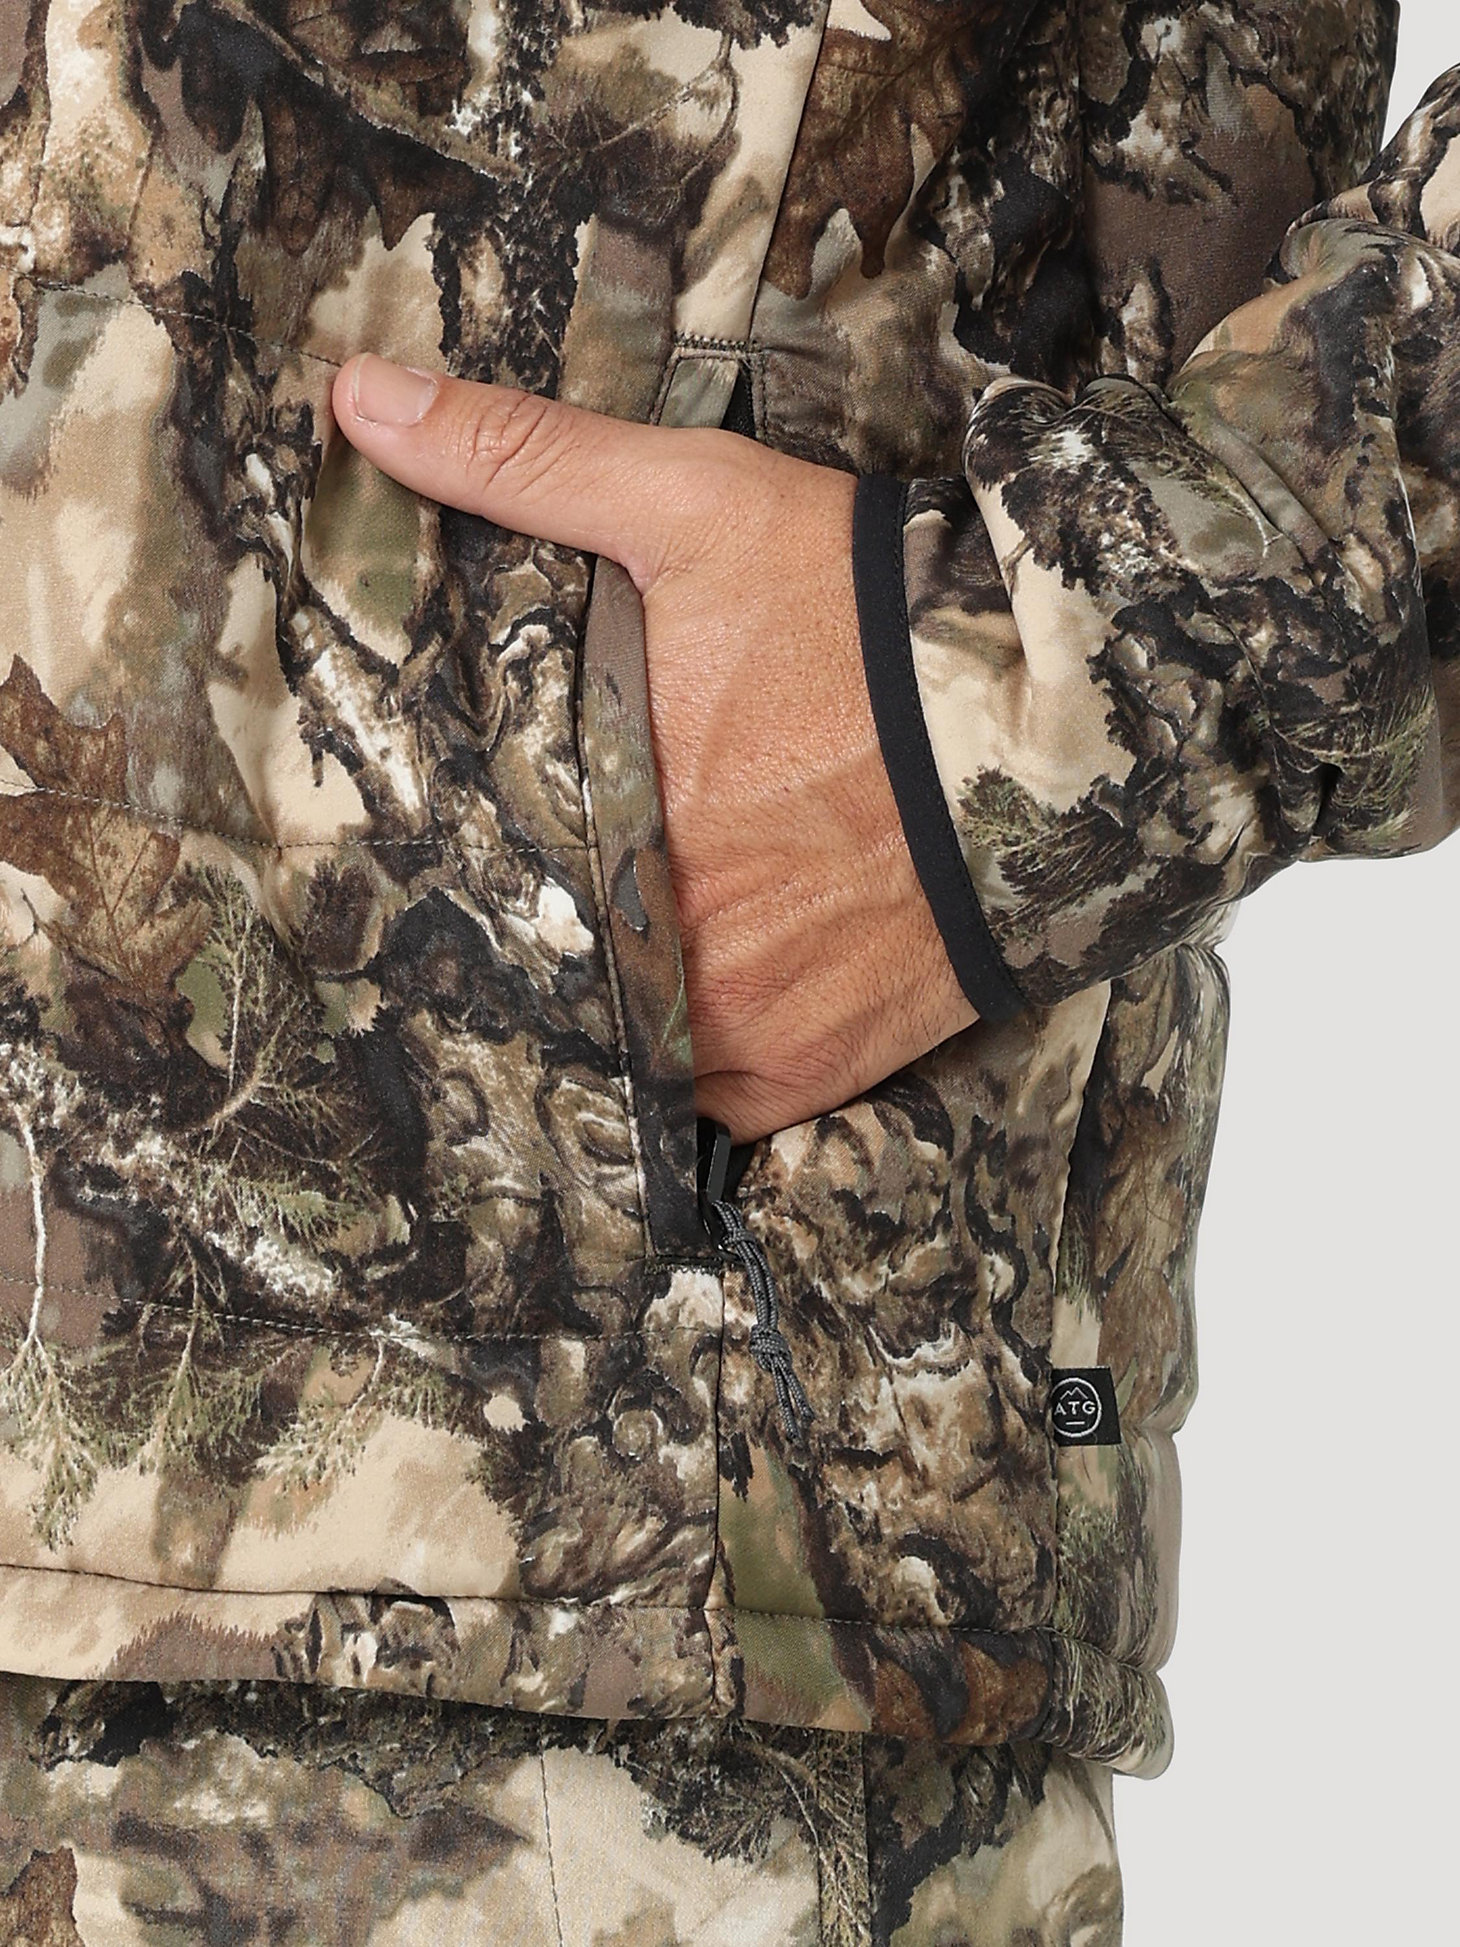 ATG Hunter™ Mid Layer Camo Jacket in Warmwoods Camo alternative view 6